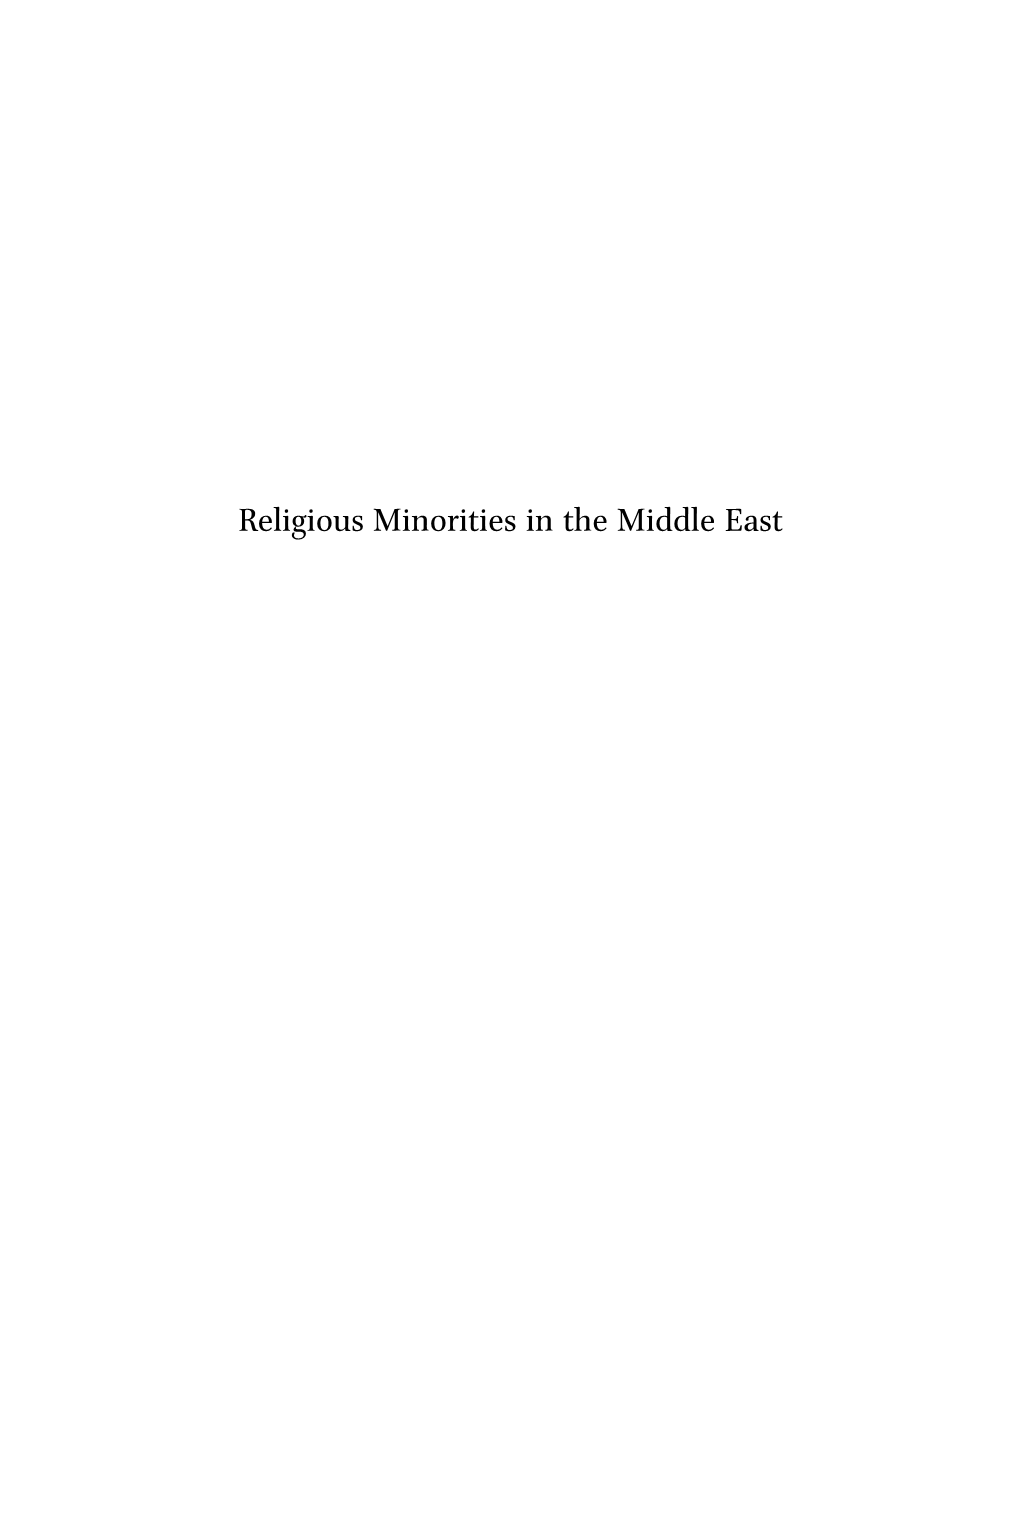 Religious Minorities in the Middle East